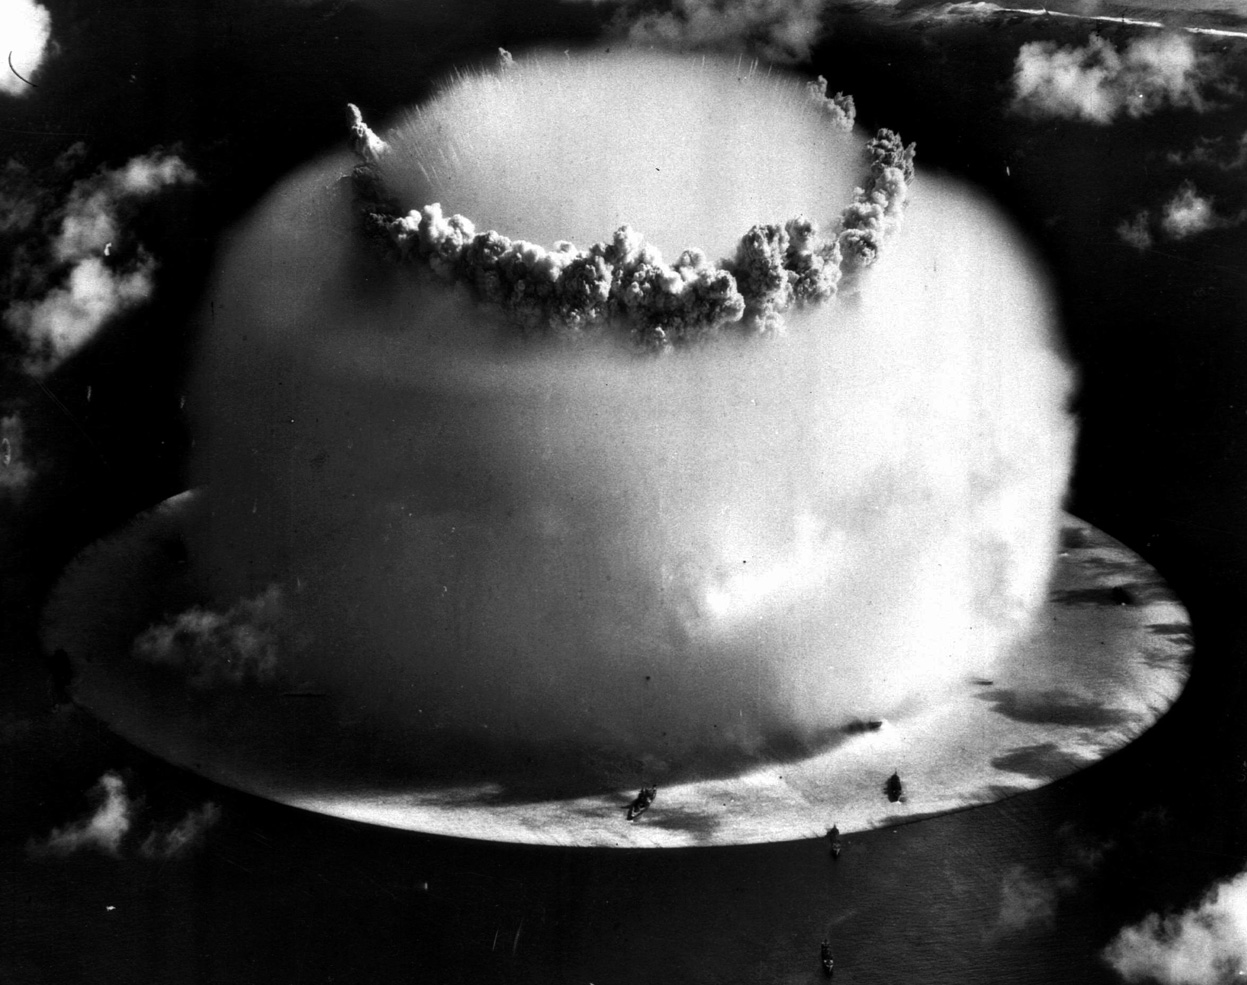 July 16, 1945, at 5:30am at the Trinity Site in New Mexico.